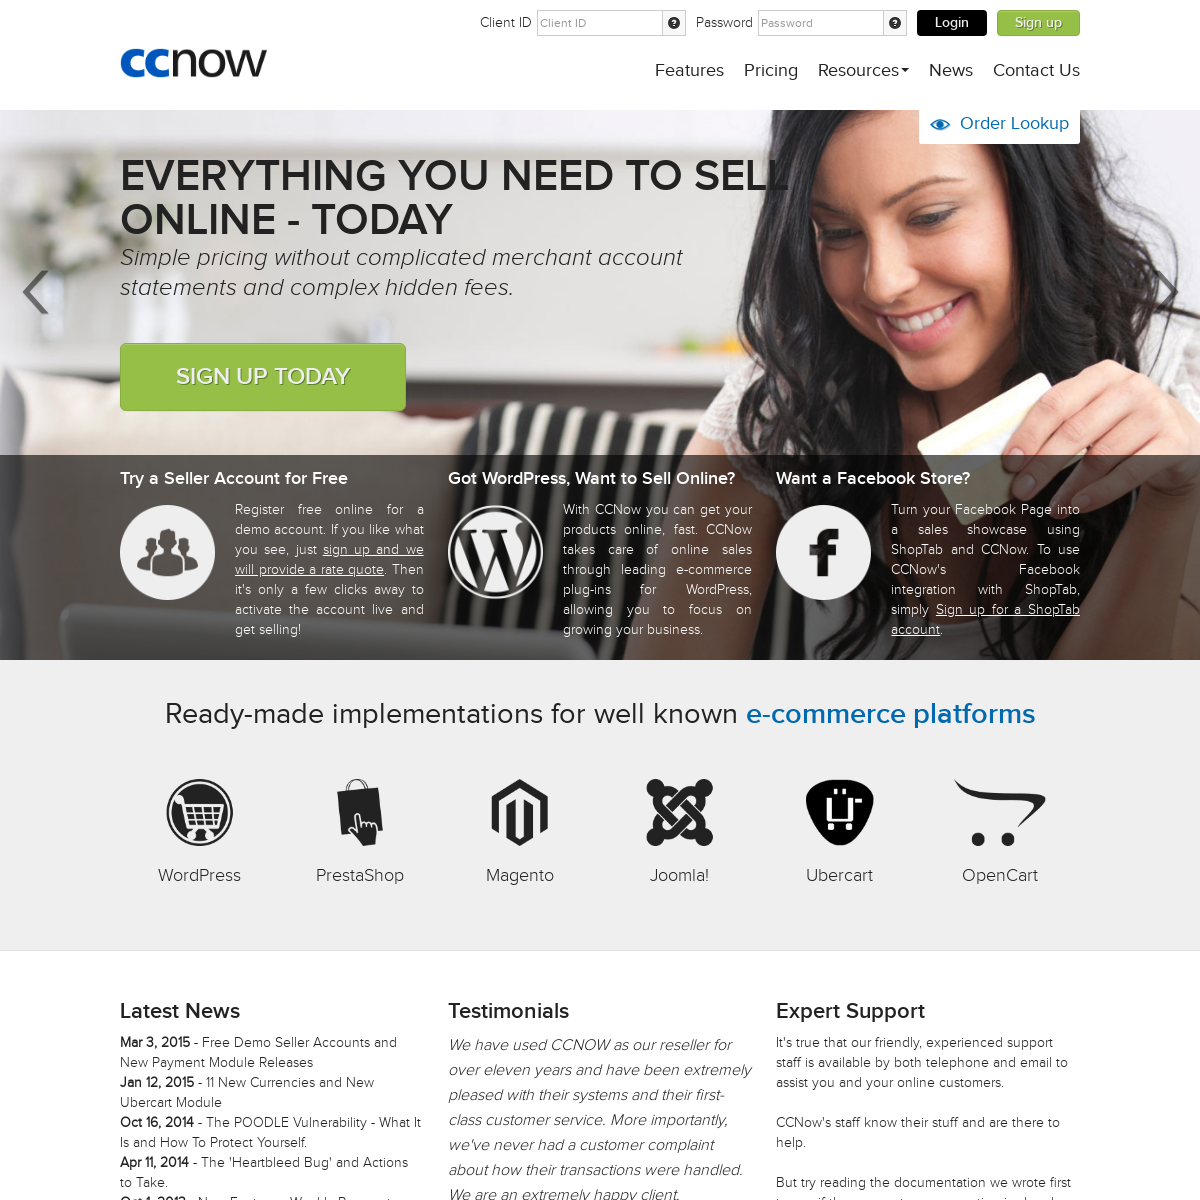 A complete backup of ccnow.com